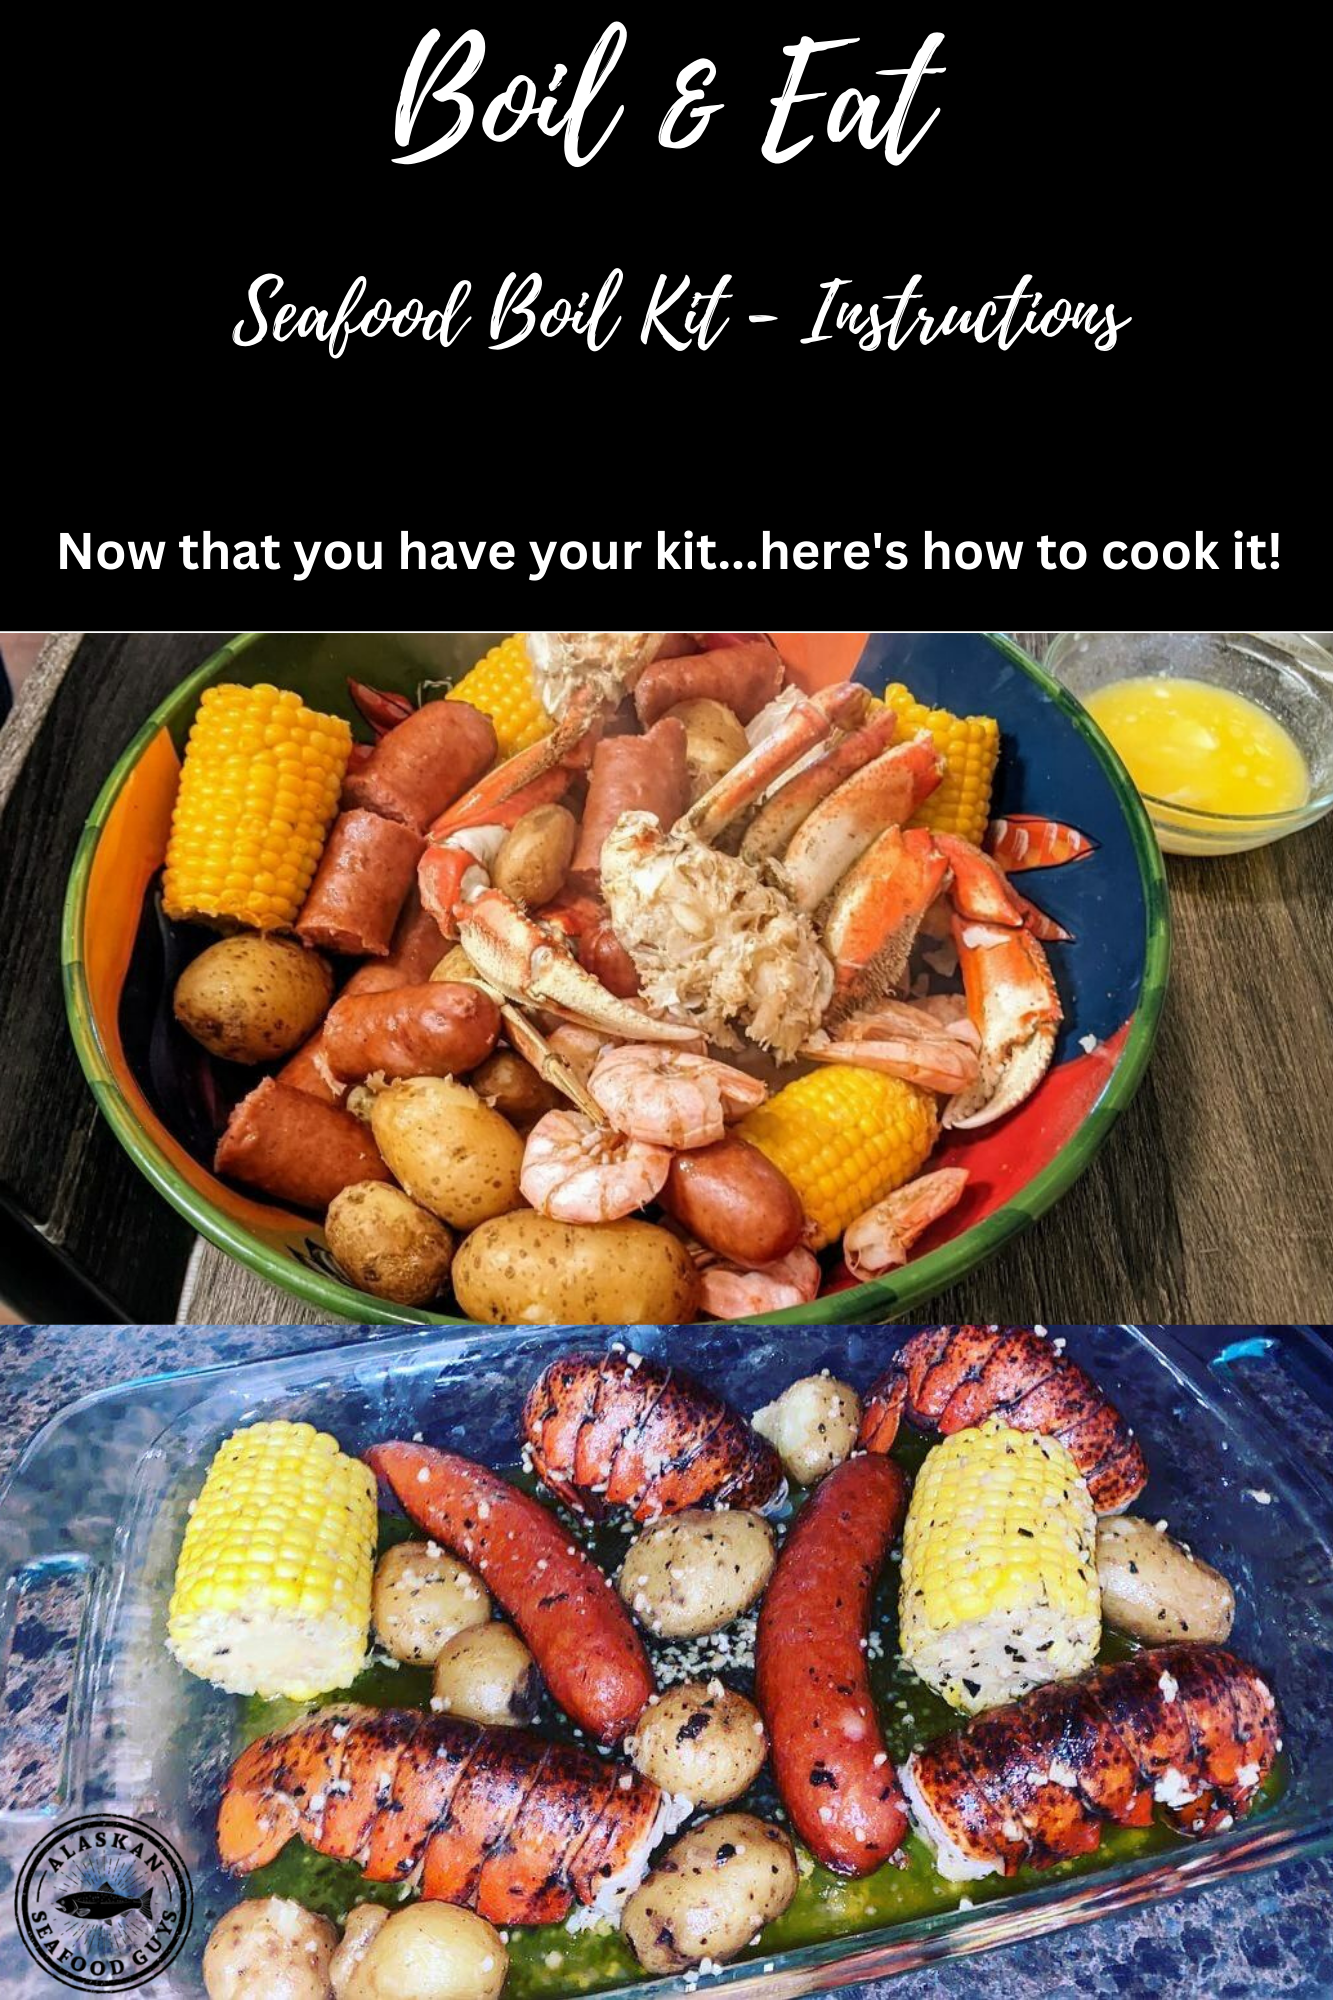 5 Person Crabzilla Seafood Boil Meal Kit